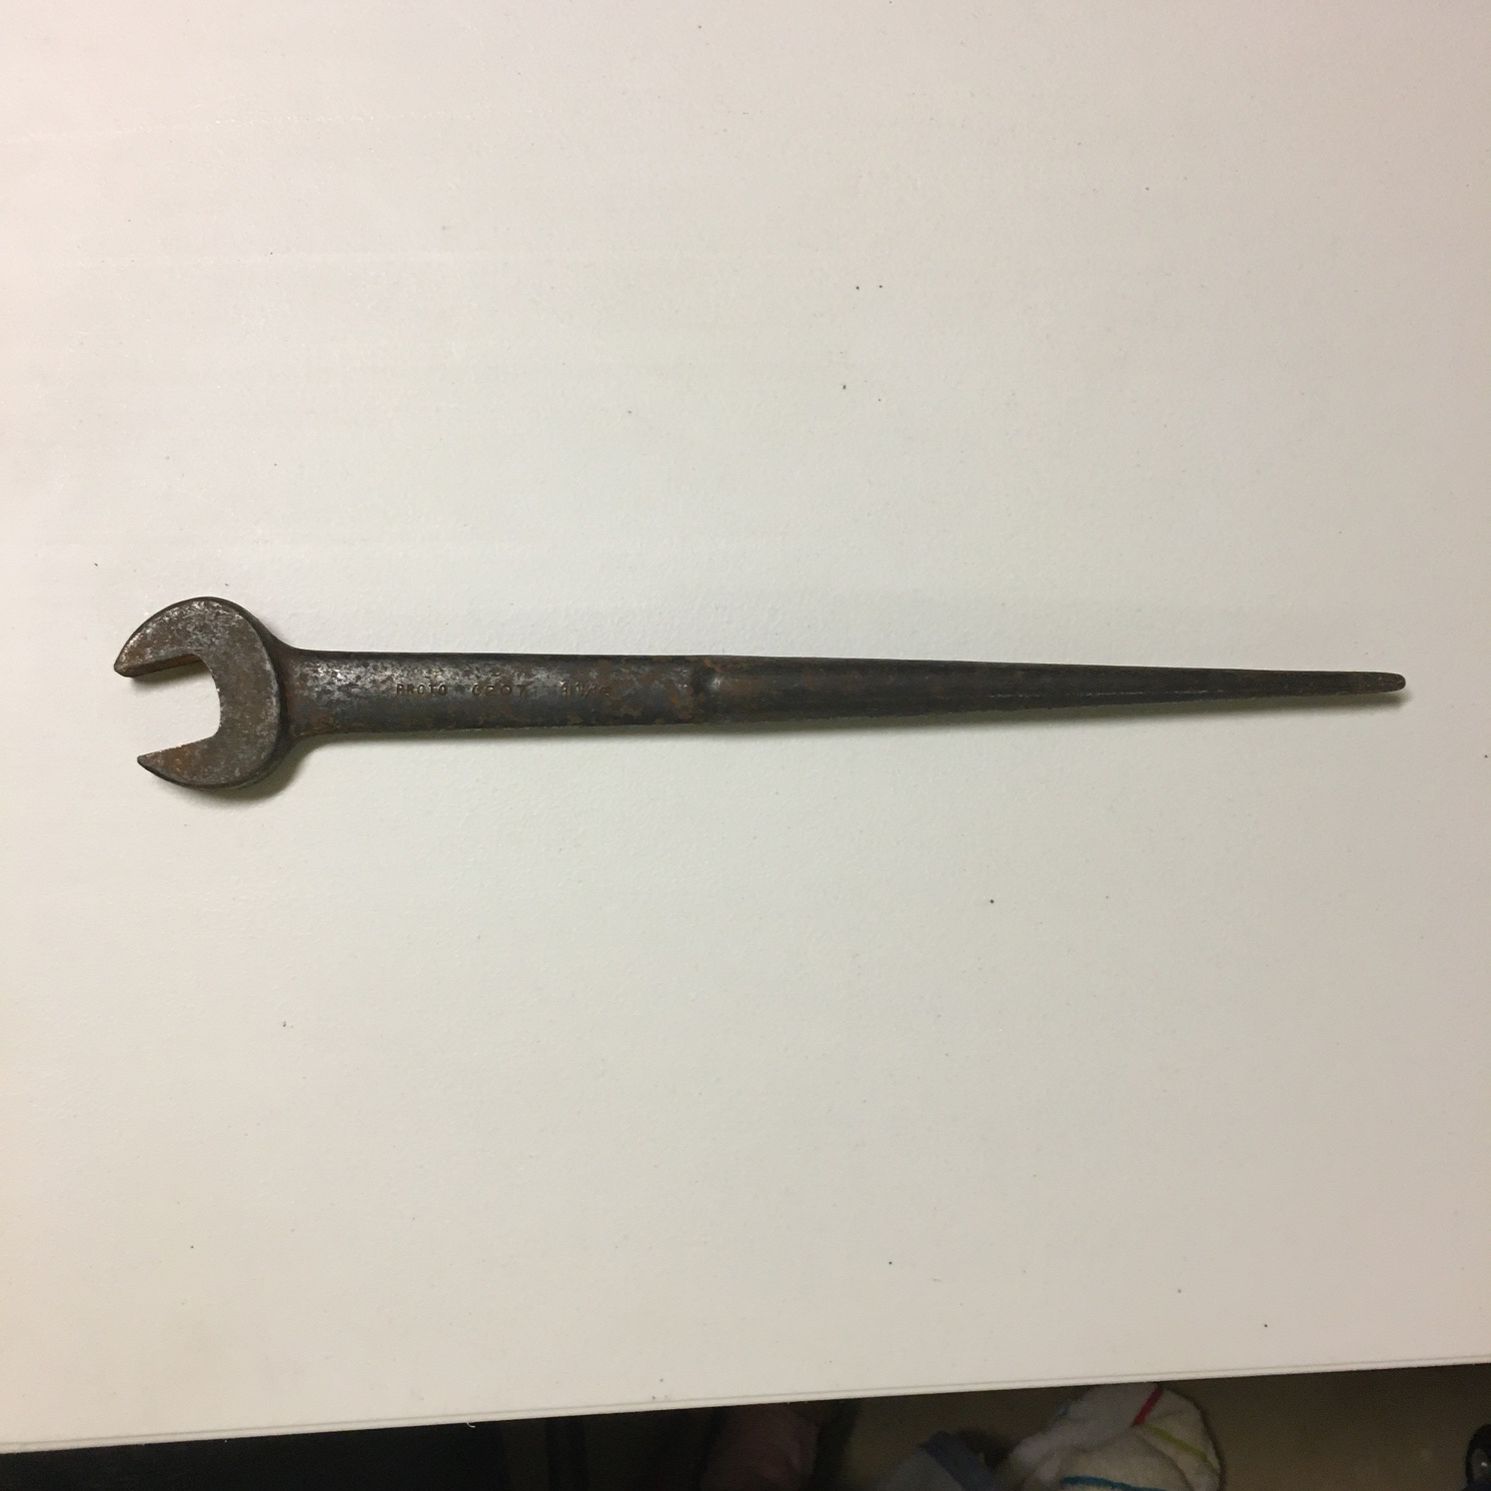 Proto 1 1/16” Spud Wrench